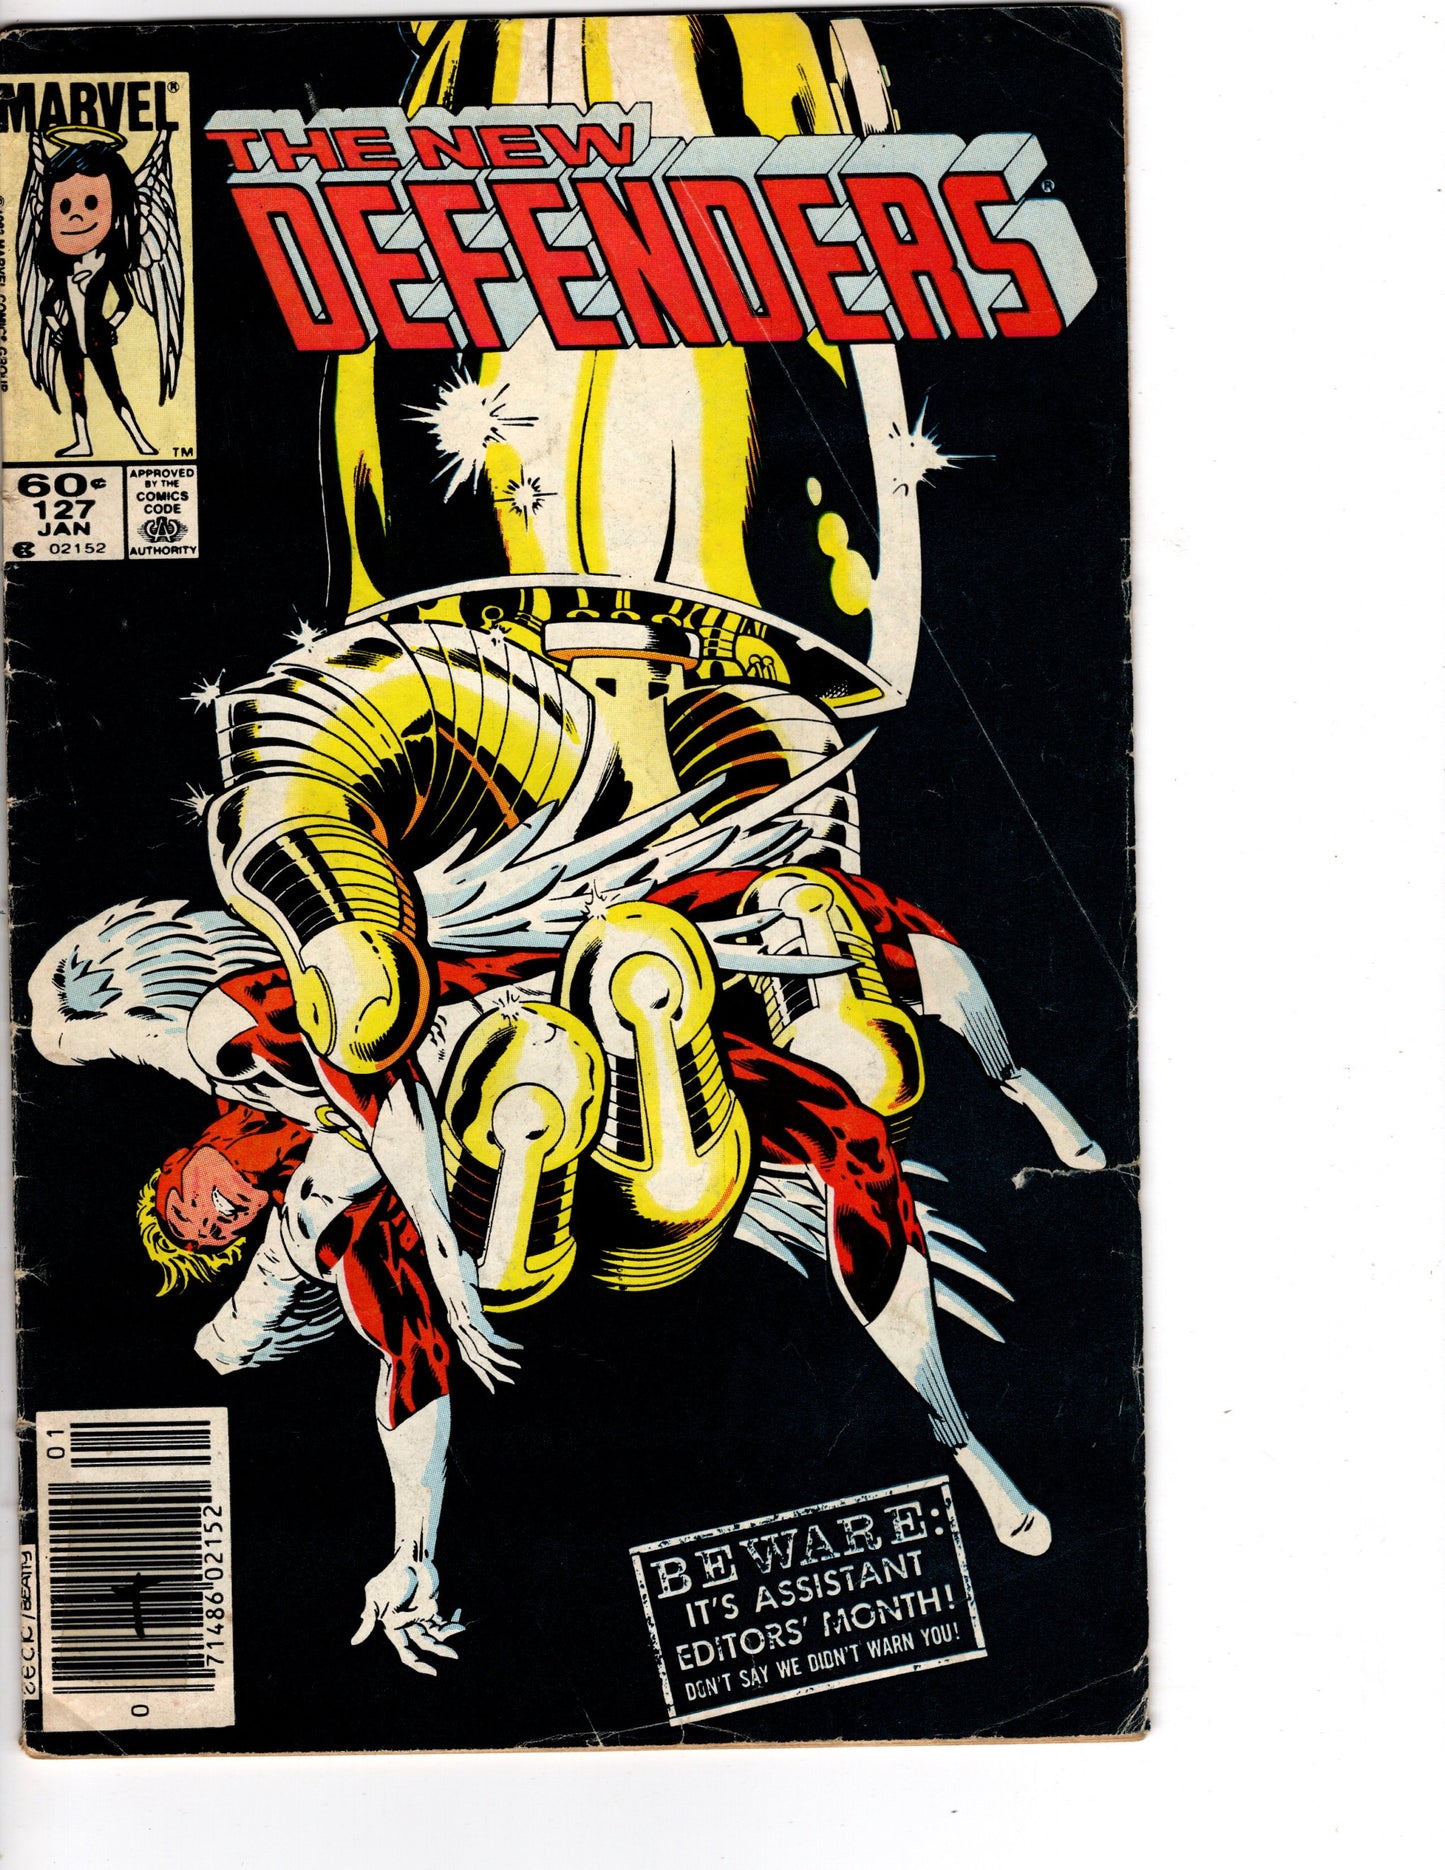 The New Defenders #127